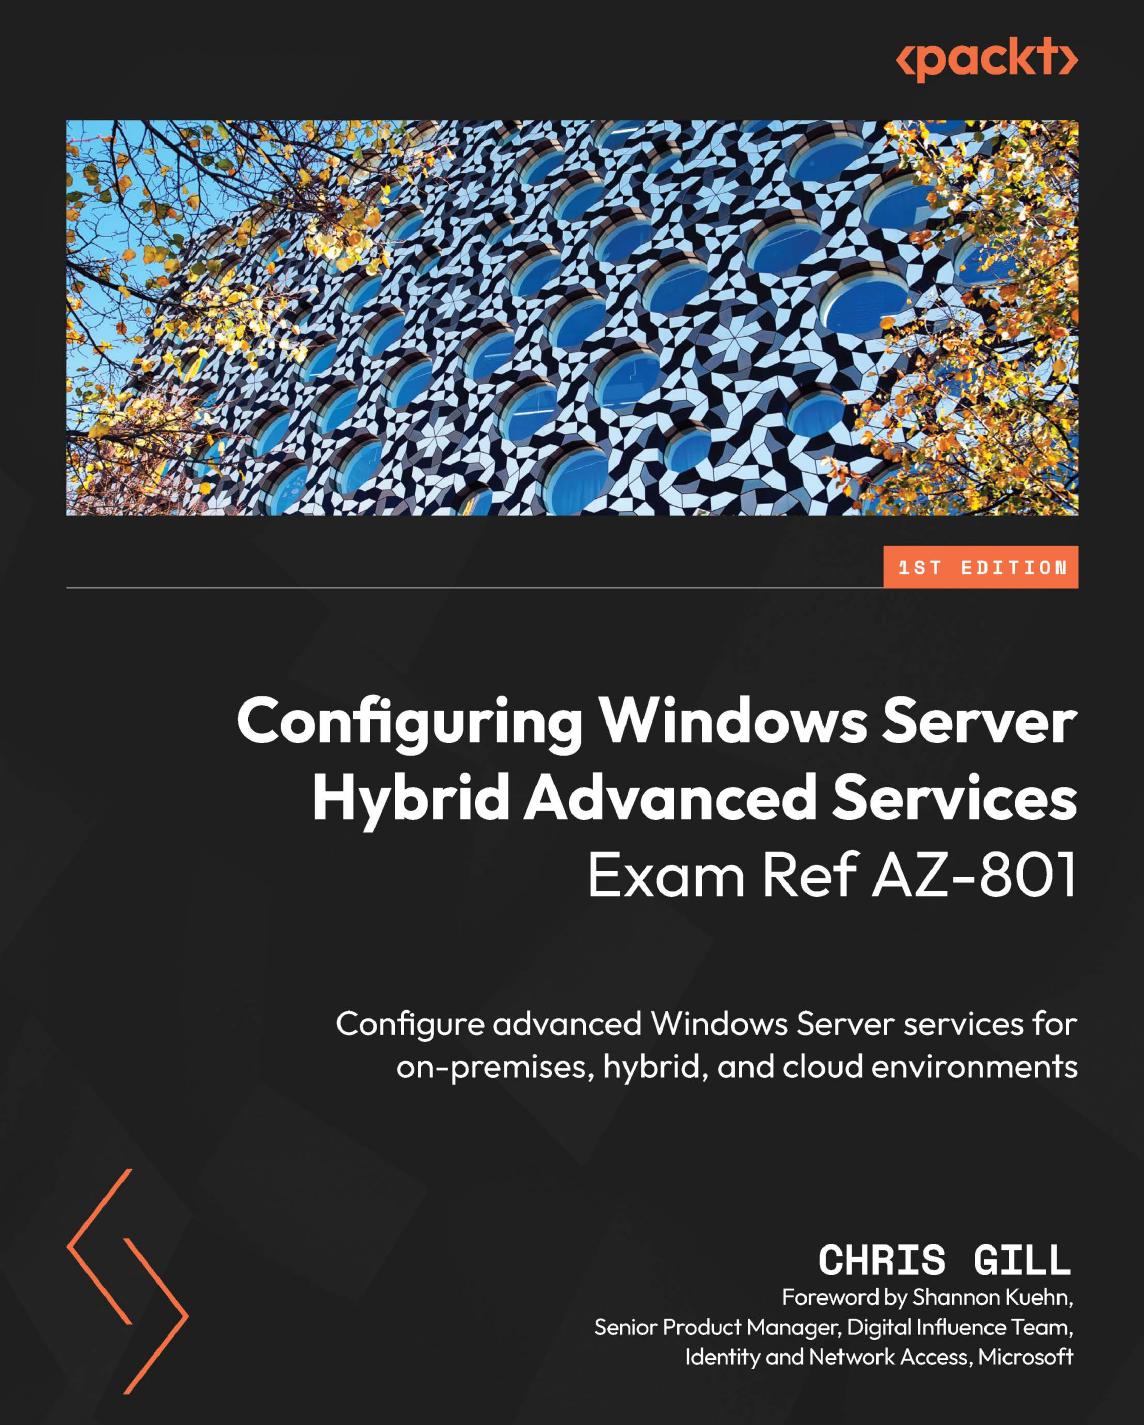 Configuring Windows Server Hybrid Advanced Services Exam Ref AZ-801: Configure advanced Windows Server services for on-premises, hybrid, and cloud environments by Chris Gill